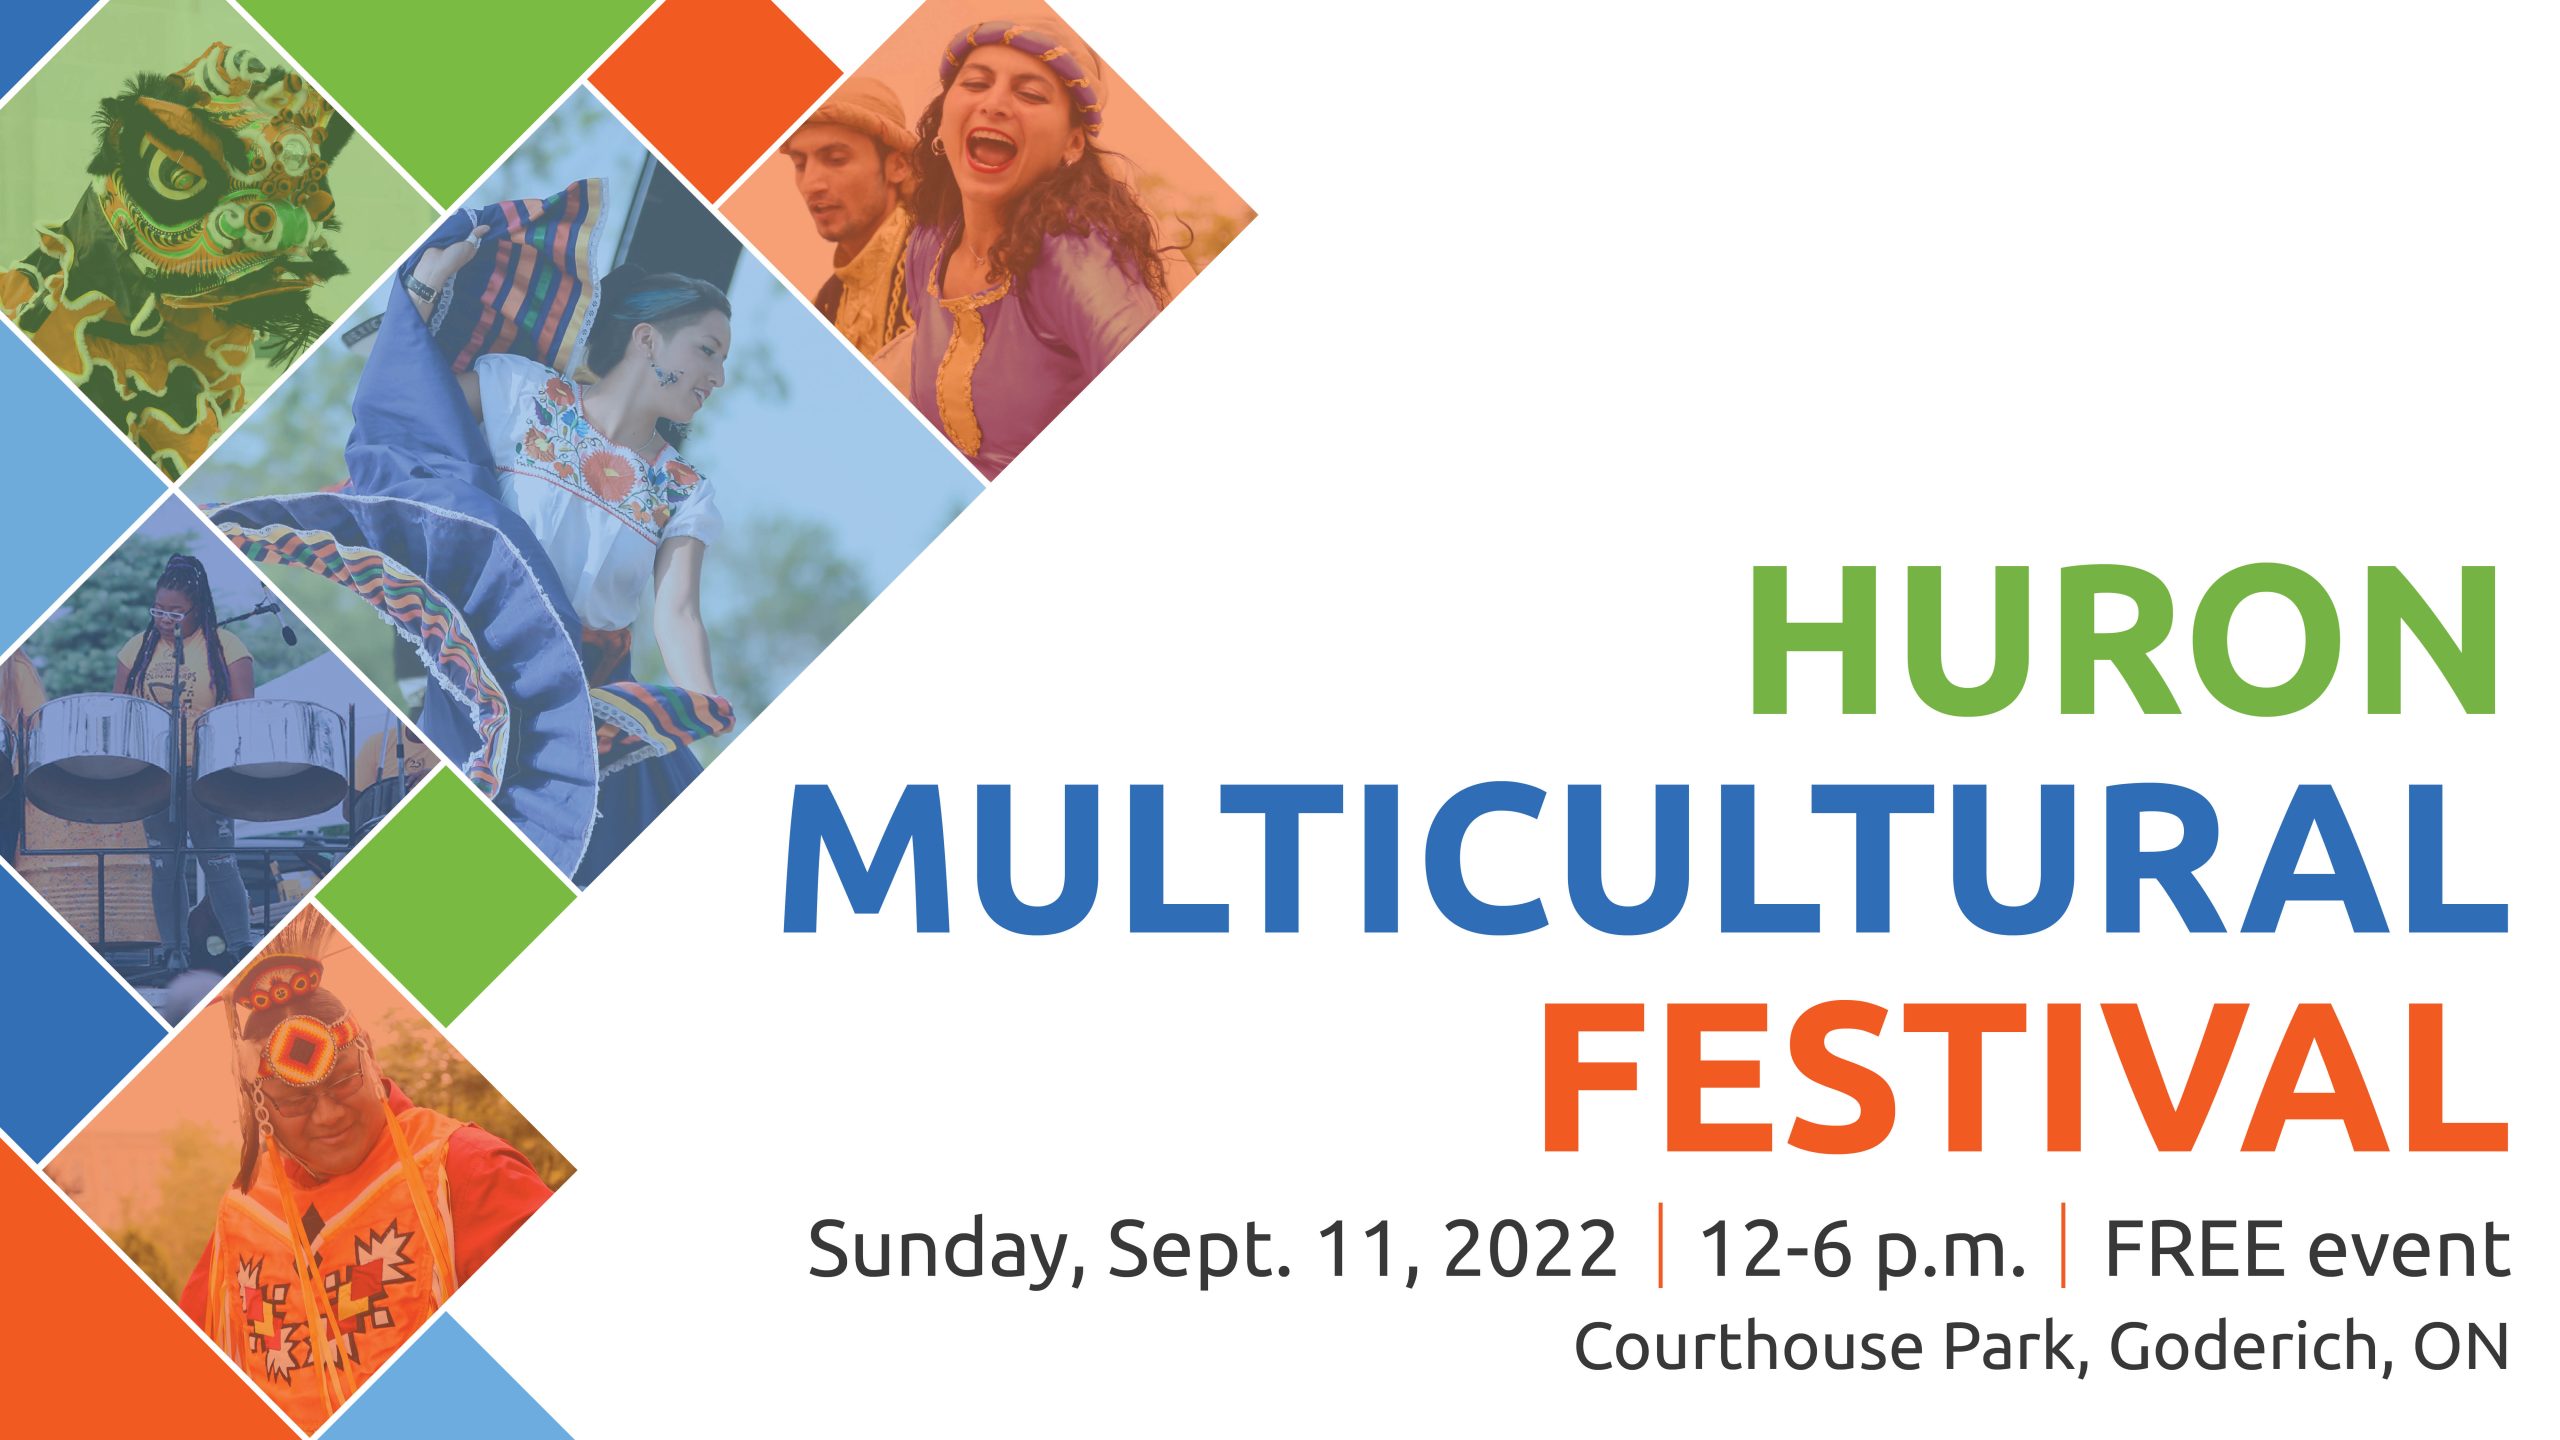 Graphic features images from previous festivals with text promoting Huron Multicultural Festival